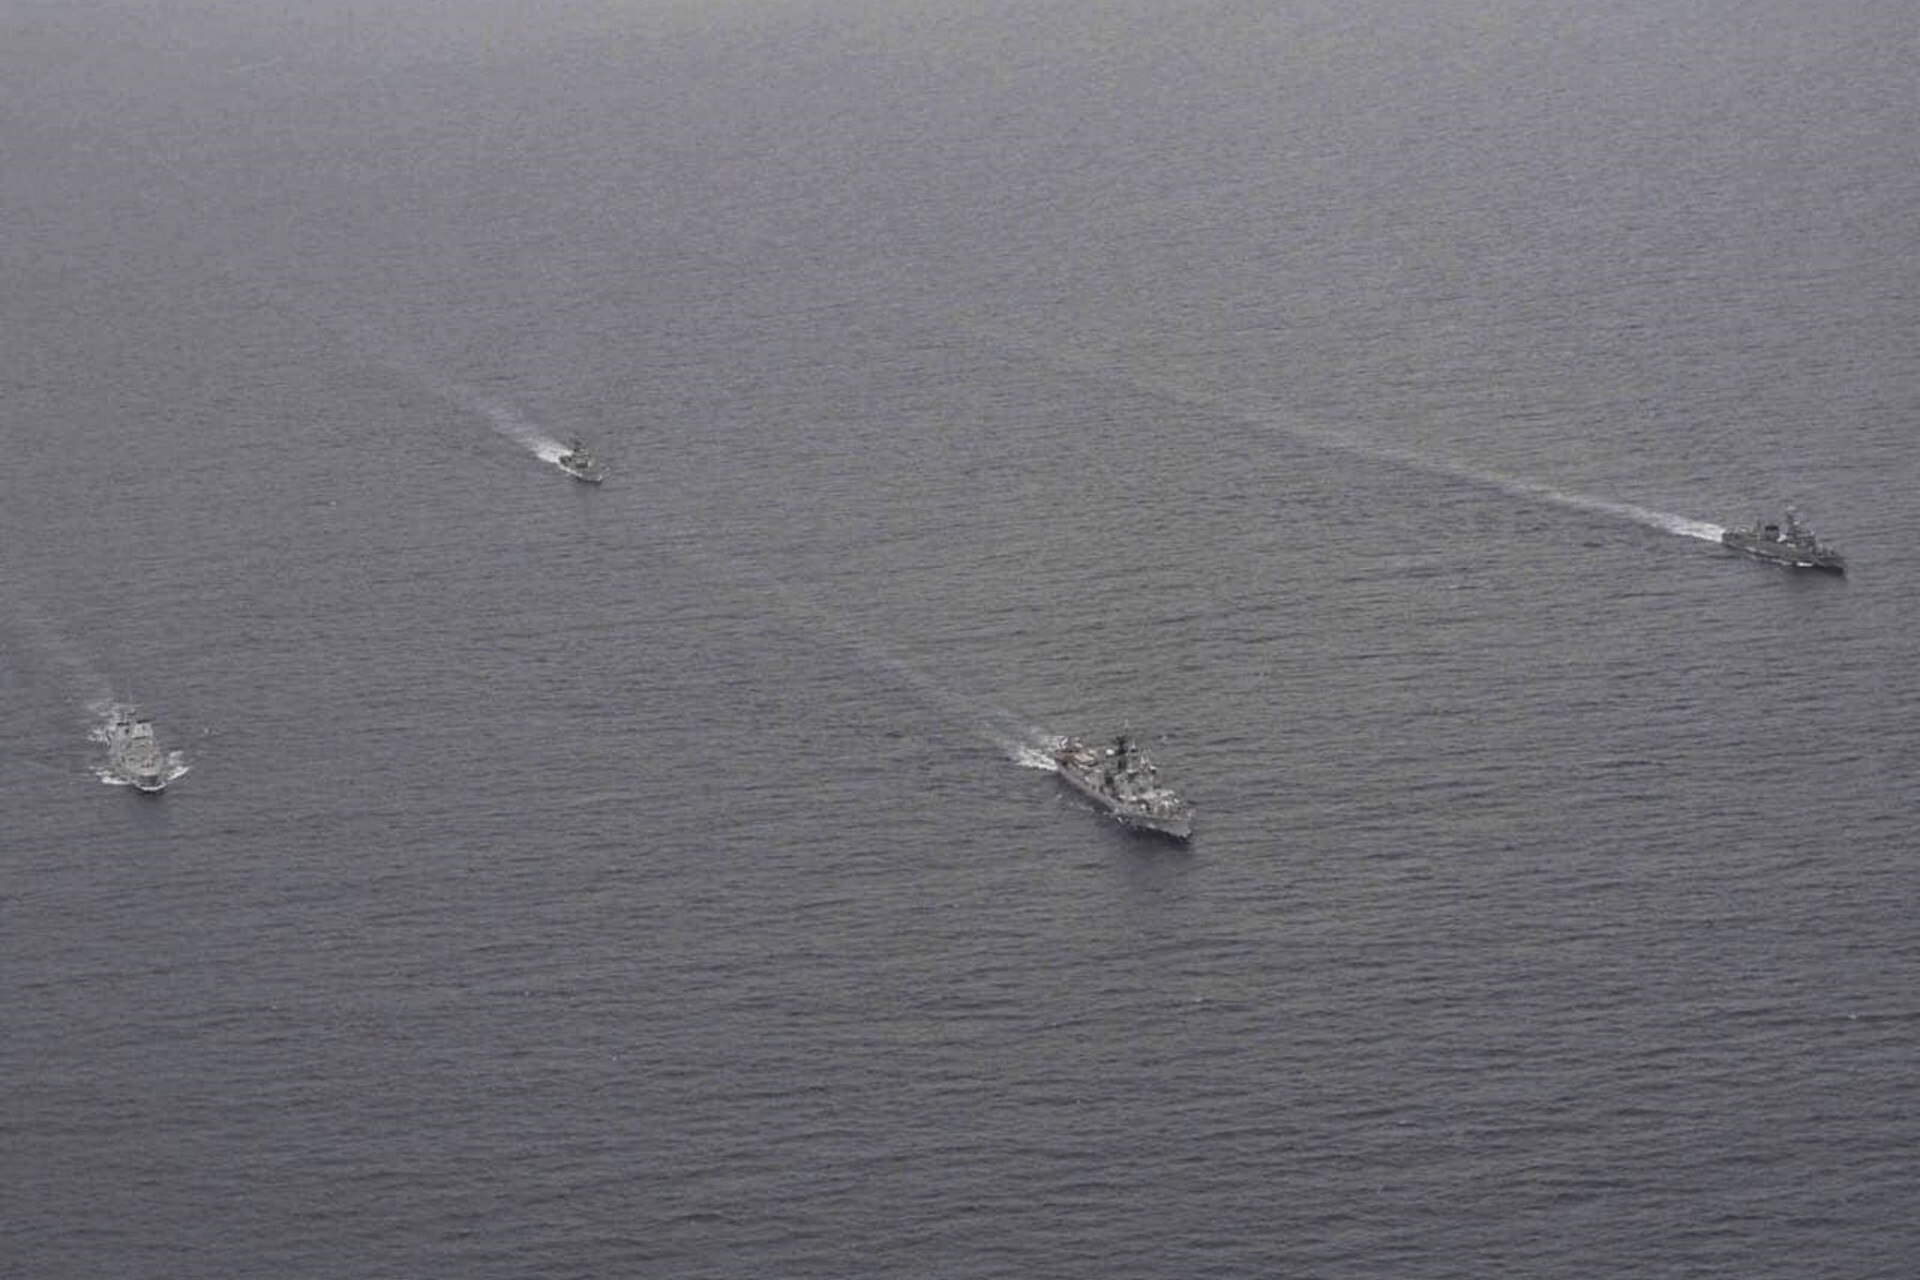 The Singapore, Indian and Thai navies conducting manoeuvring exercises in the Andaman Sea.